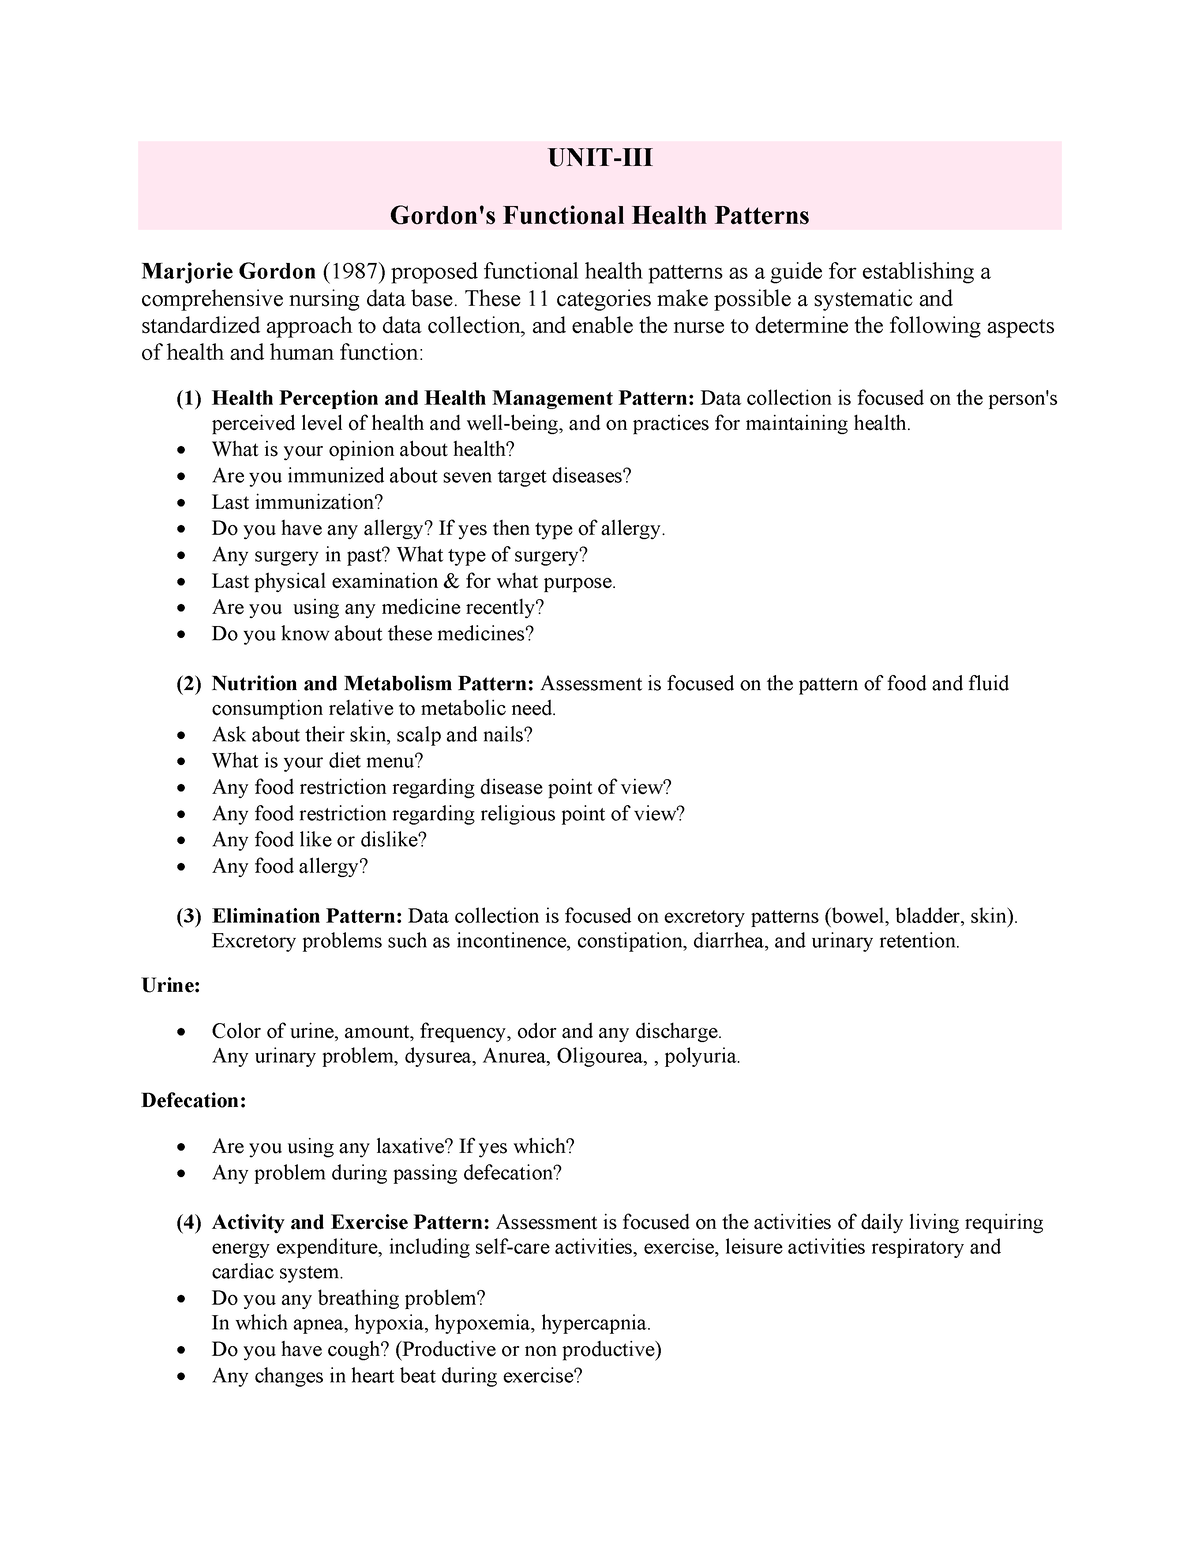 gordons functional health patterns example